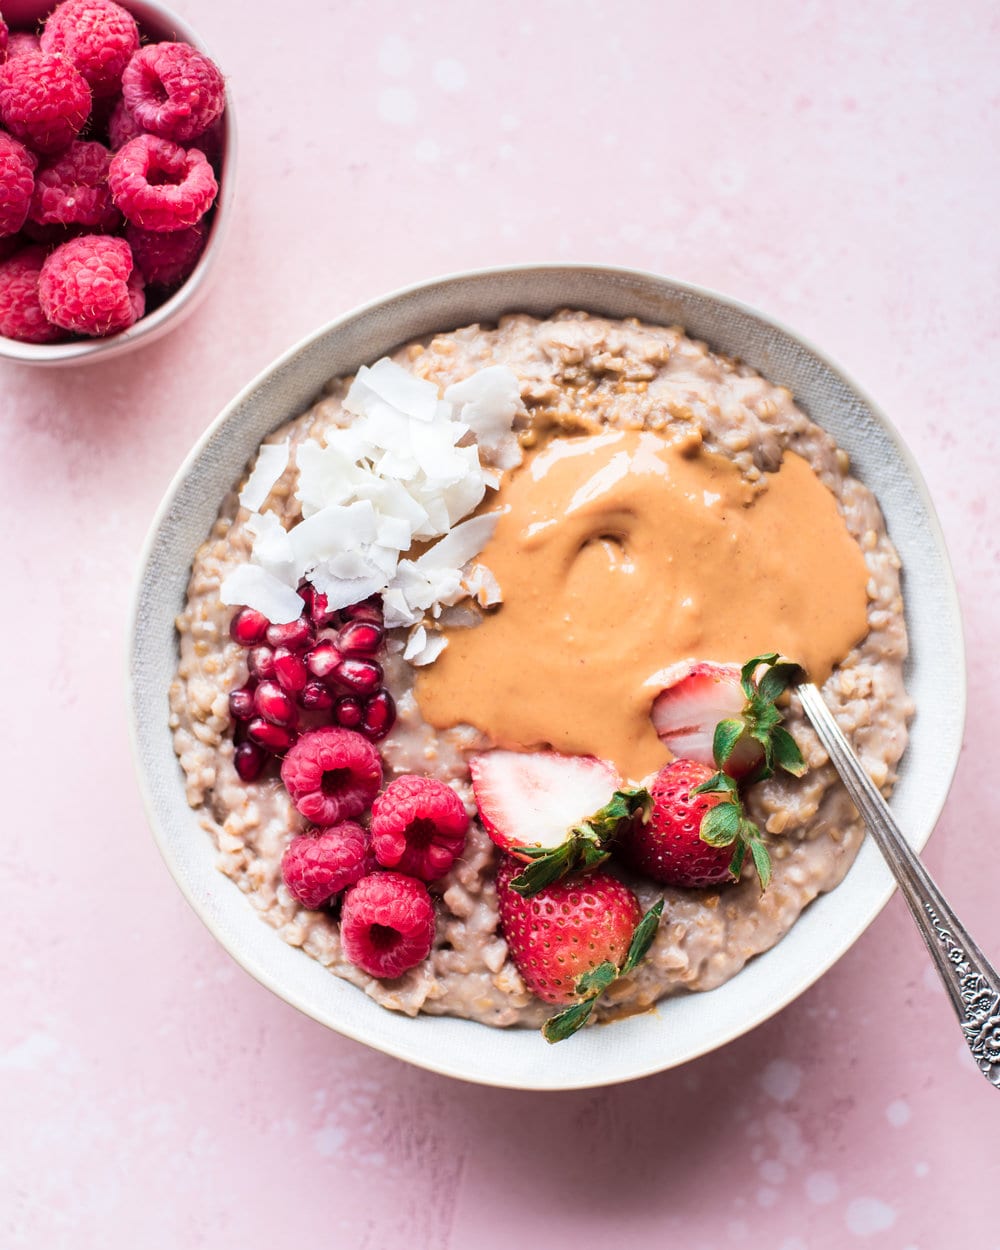 Oatmeal with peanut butter and strawberries in a white bowl on a pink table.